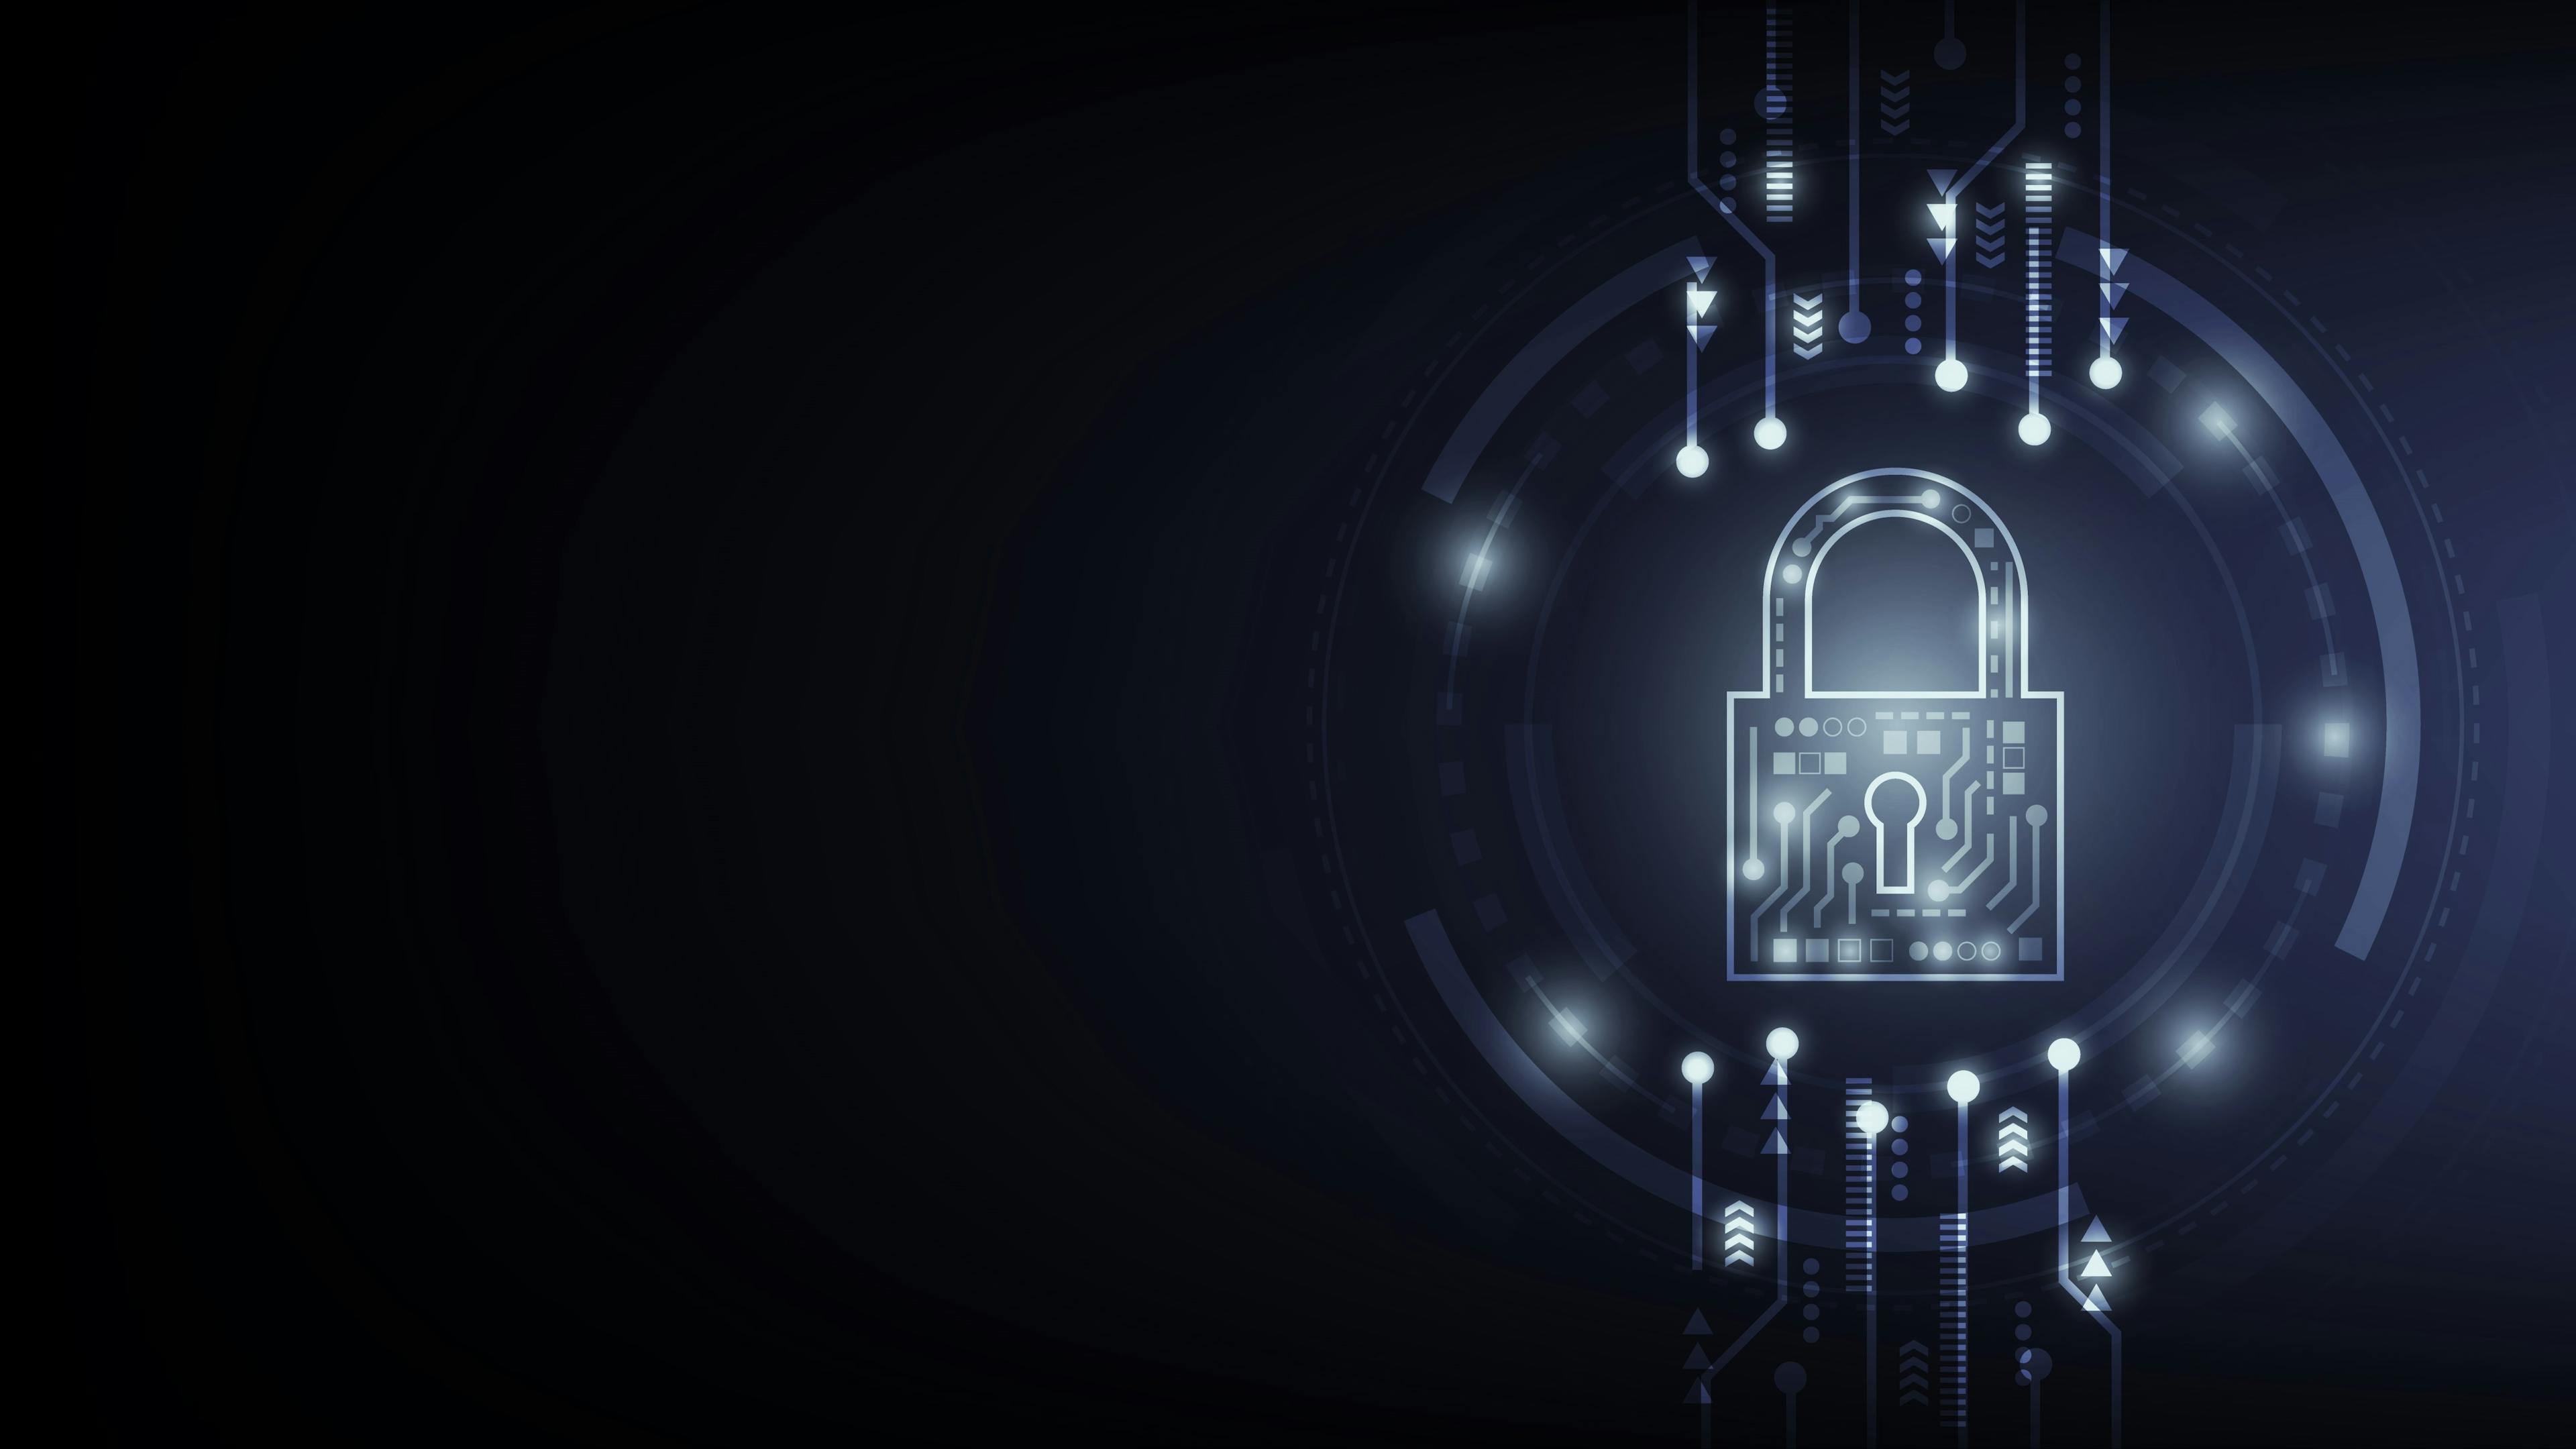 When businesses think about cybersecurity, there are several important factors they need to consider to protect their systems, data, and operations. Here are some key considerations: